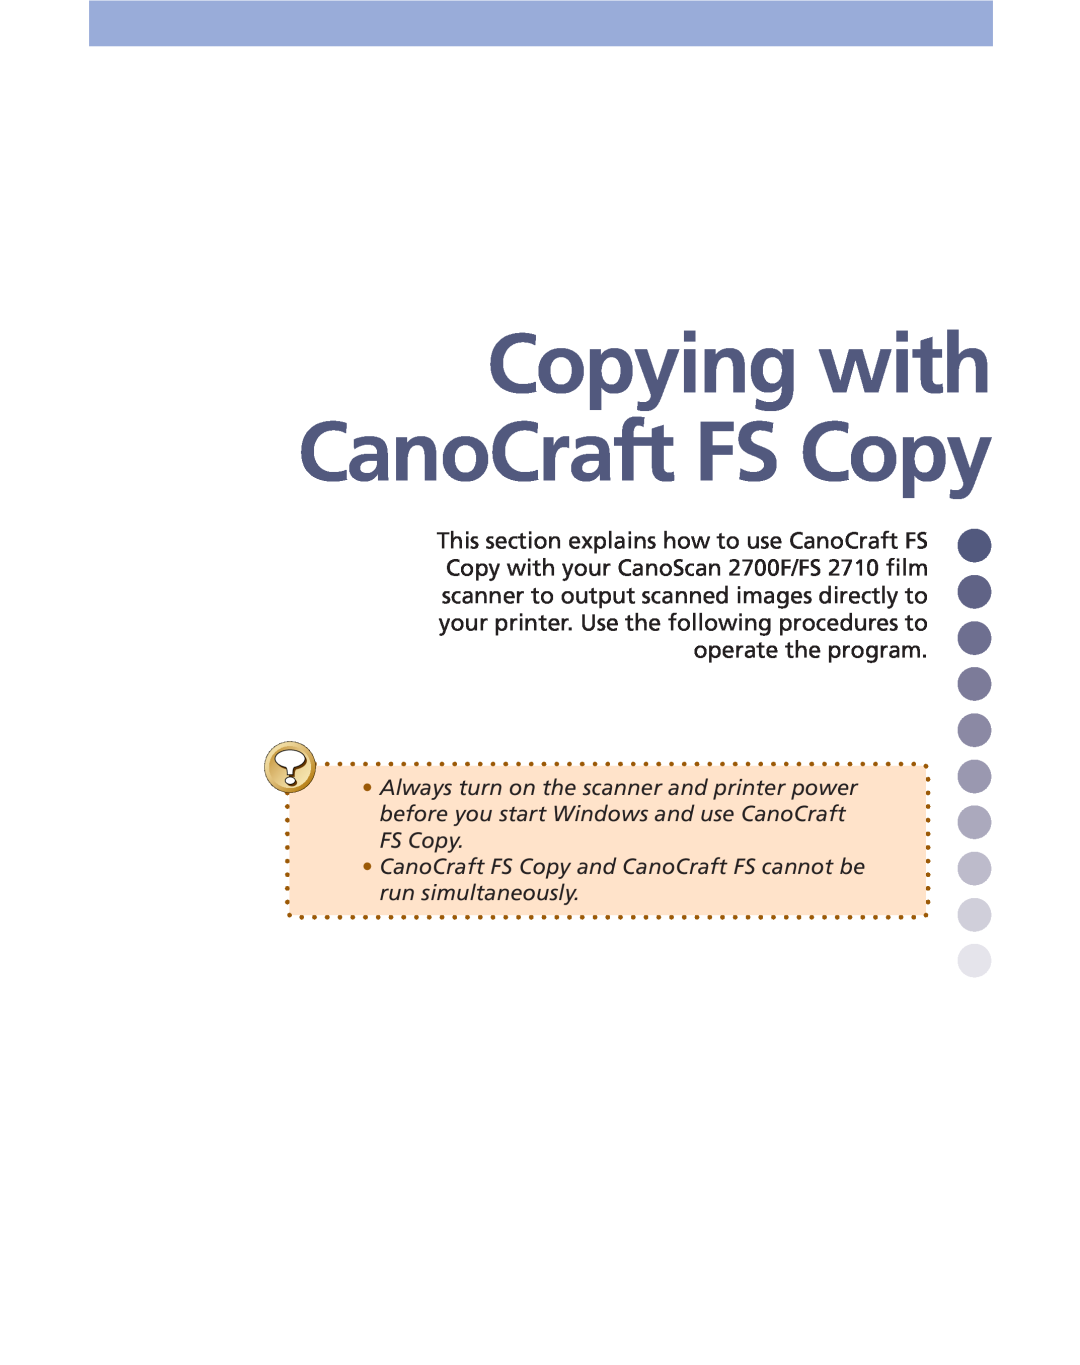 Canon FS 3.6 manual Copying with CanoCraft FS Copy, CanoCraft FS Copy and CanoCraft FS cannot be run simultaneously 